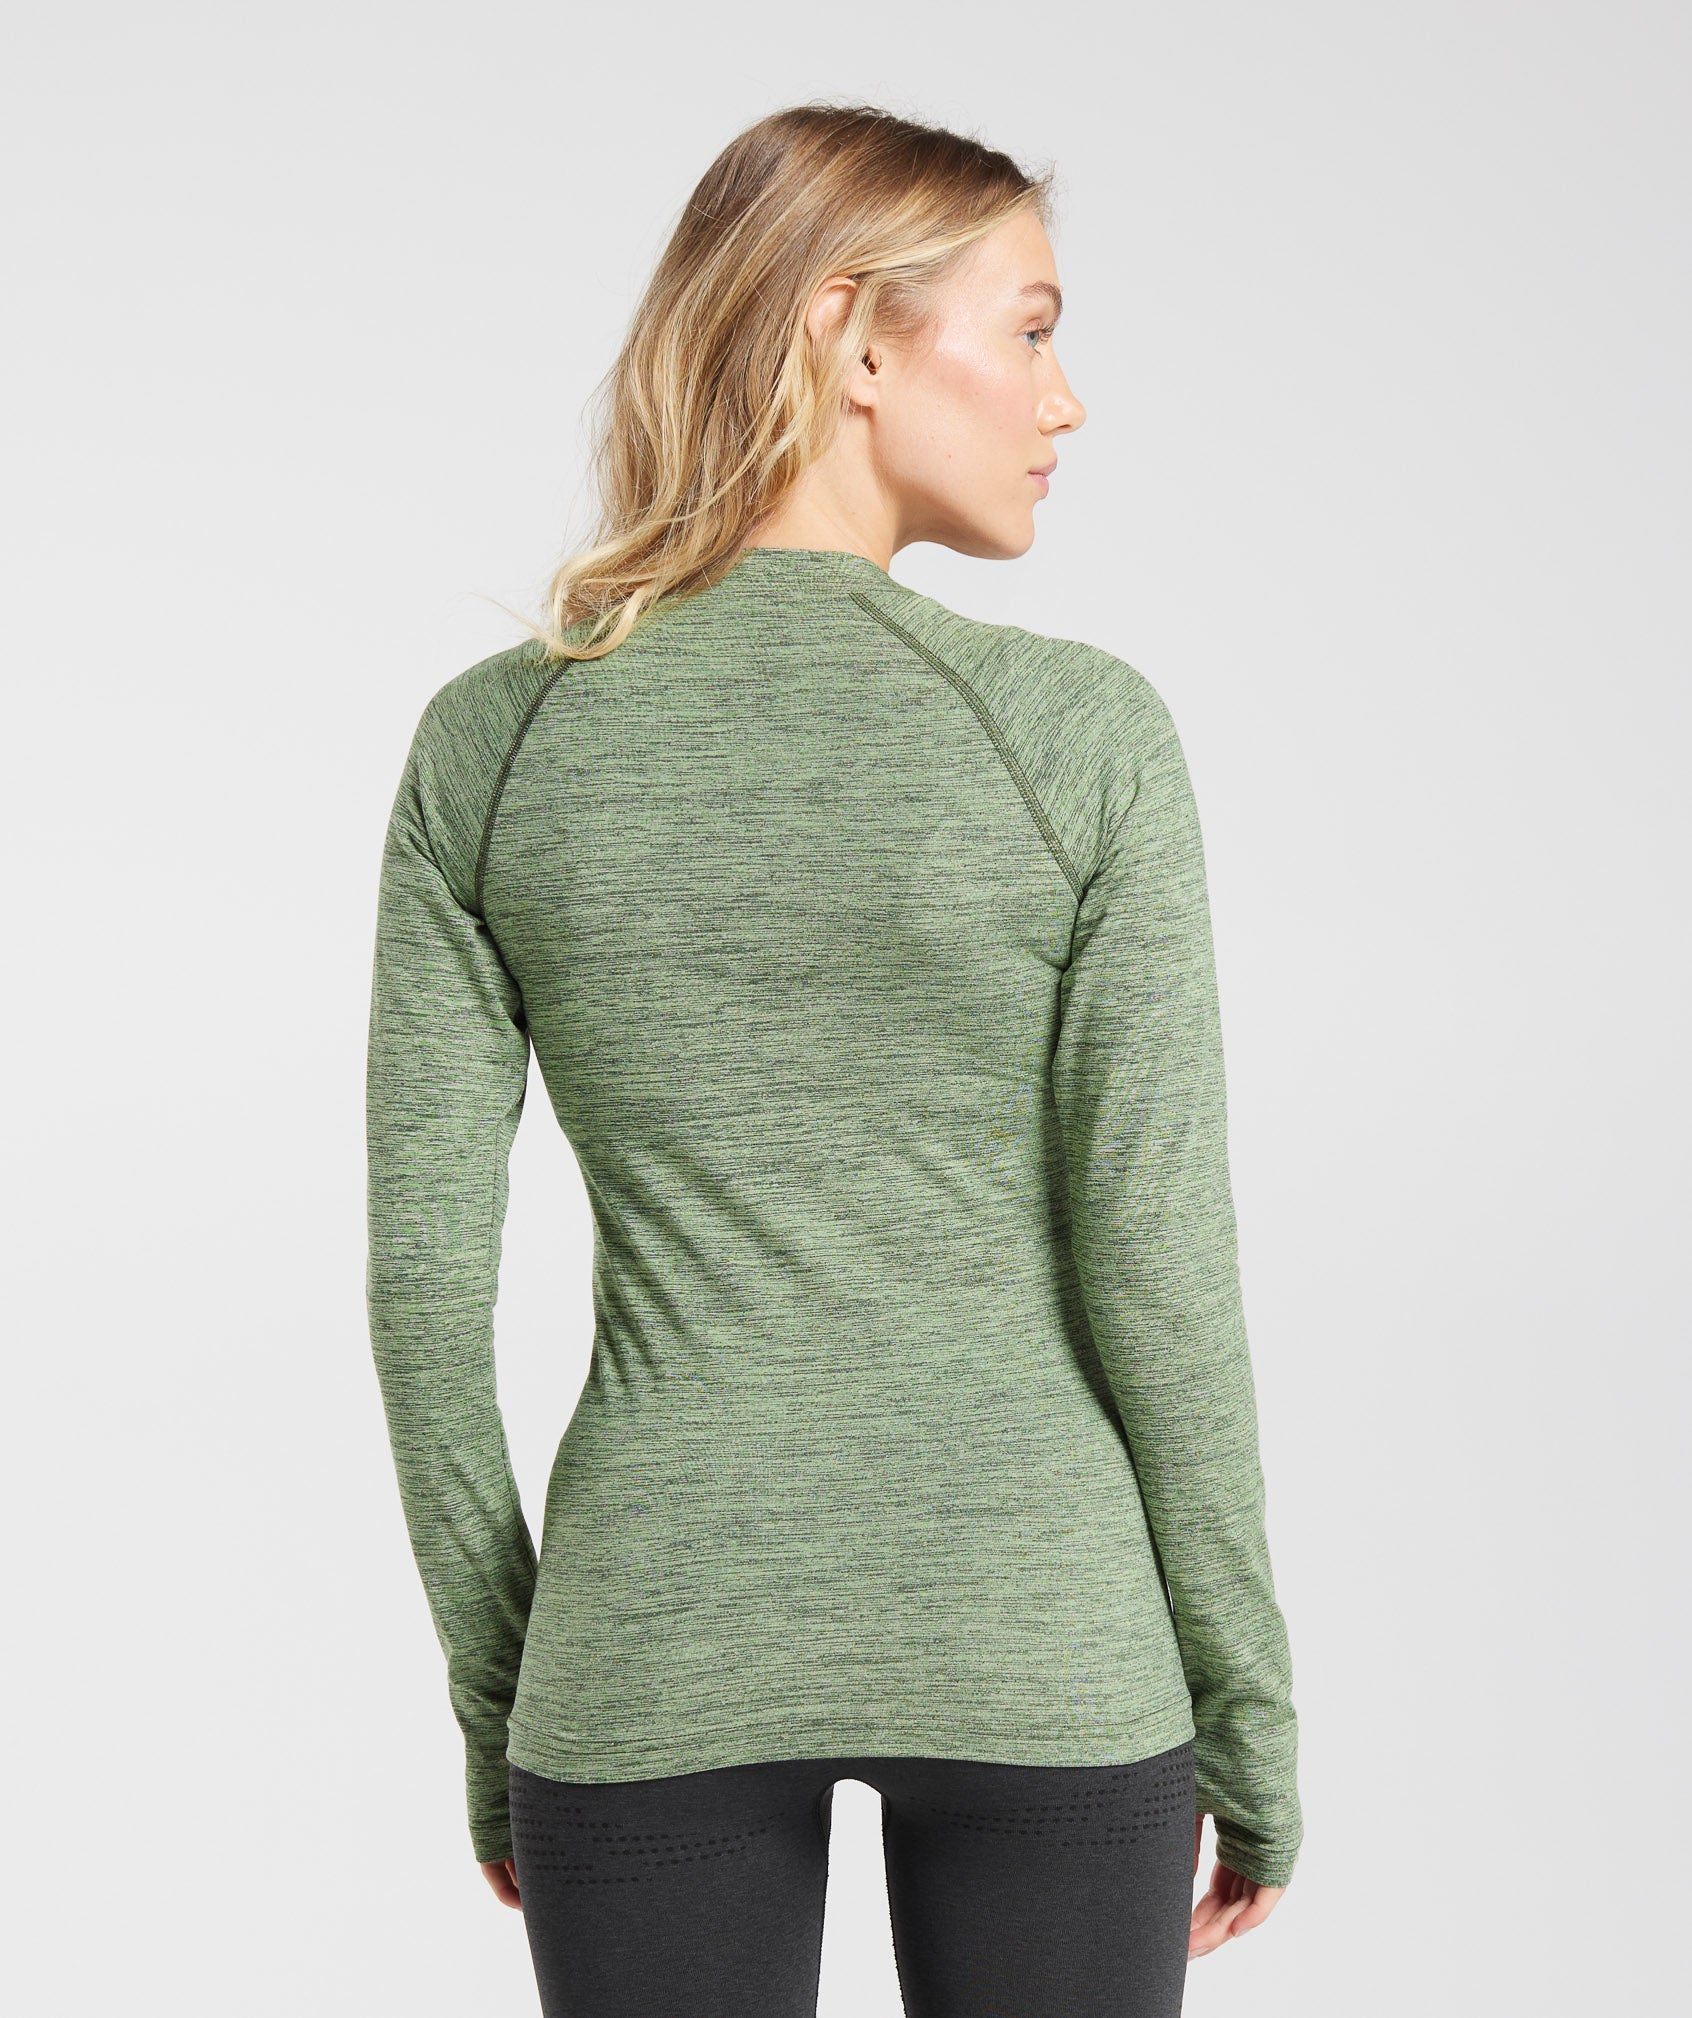 Fleece Lined Long Sleeve Top in Winter Olive/Light Sage Green - view 2